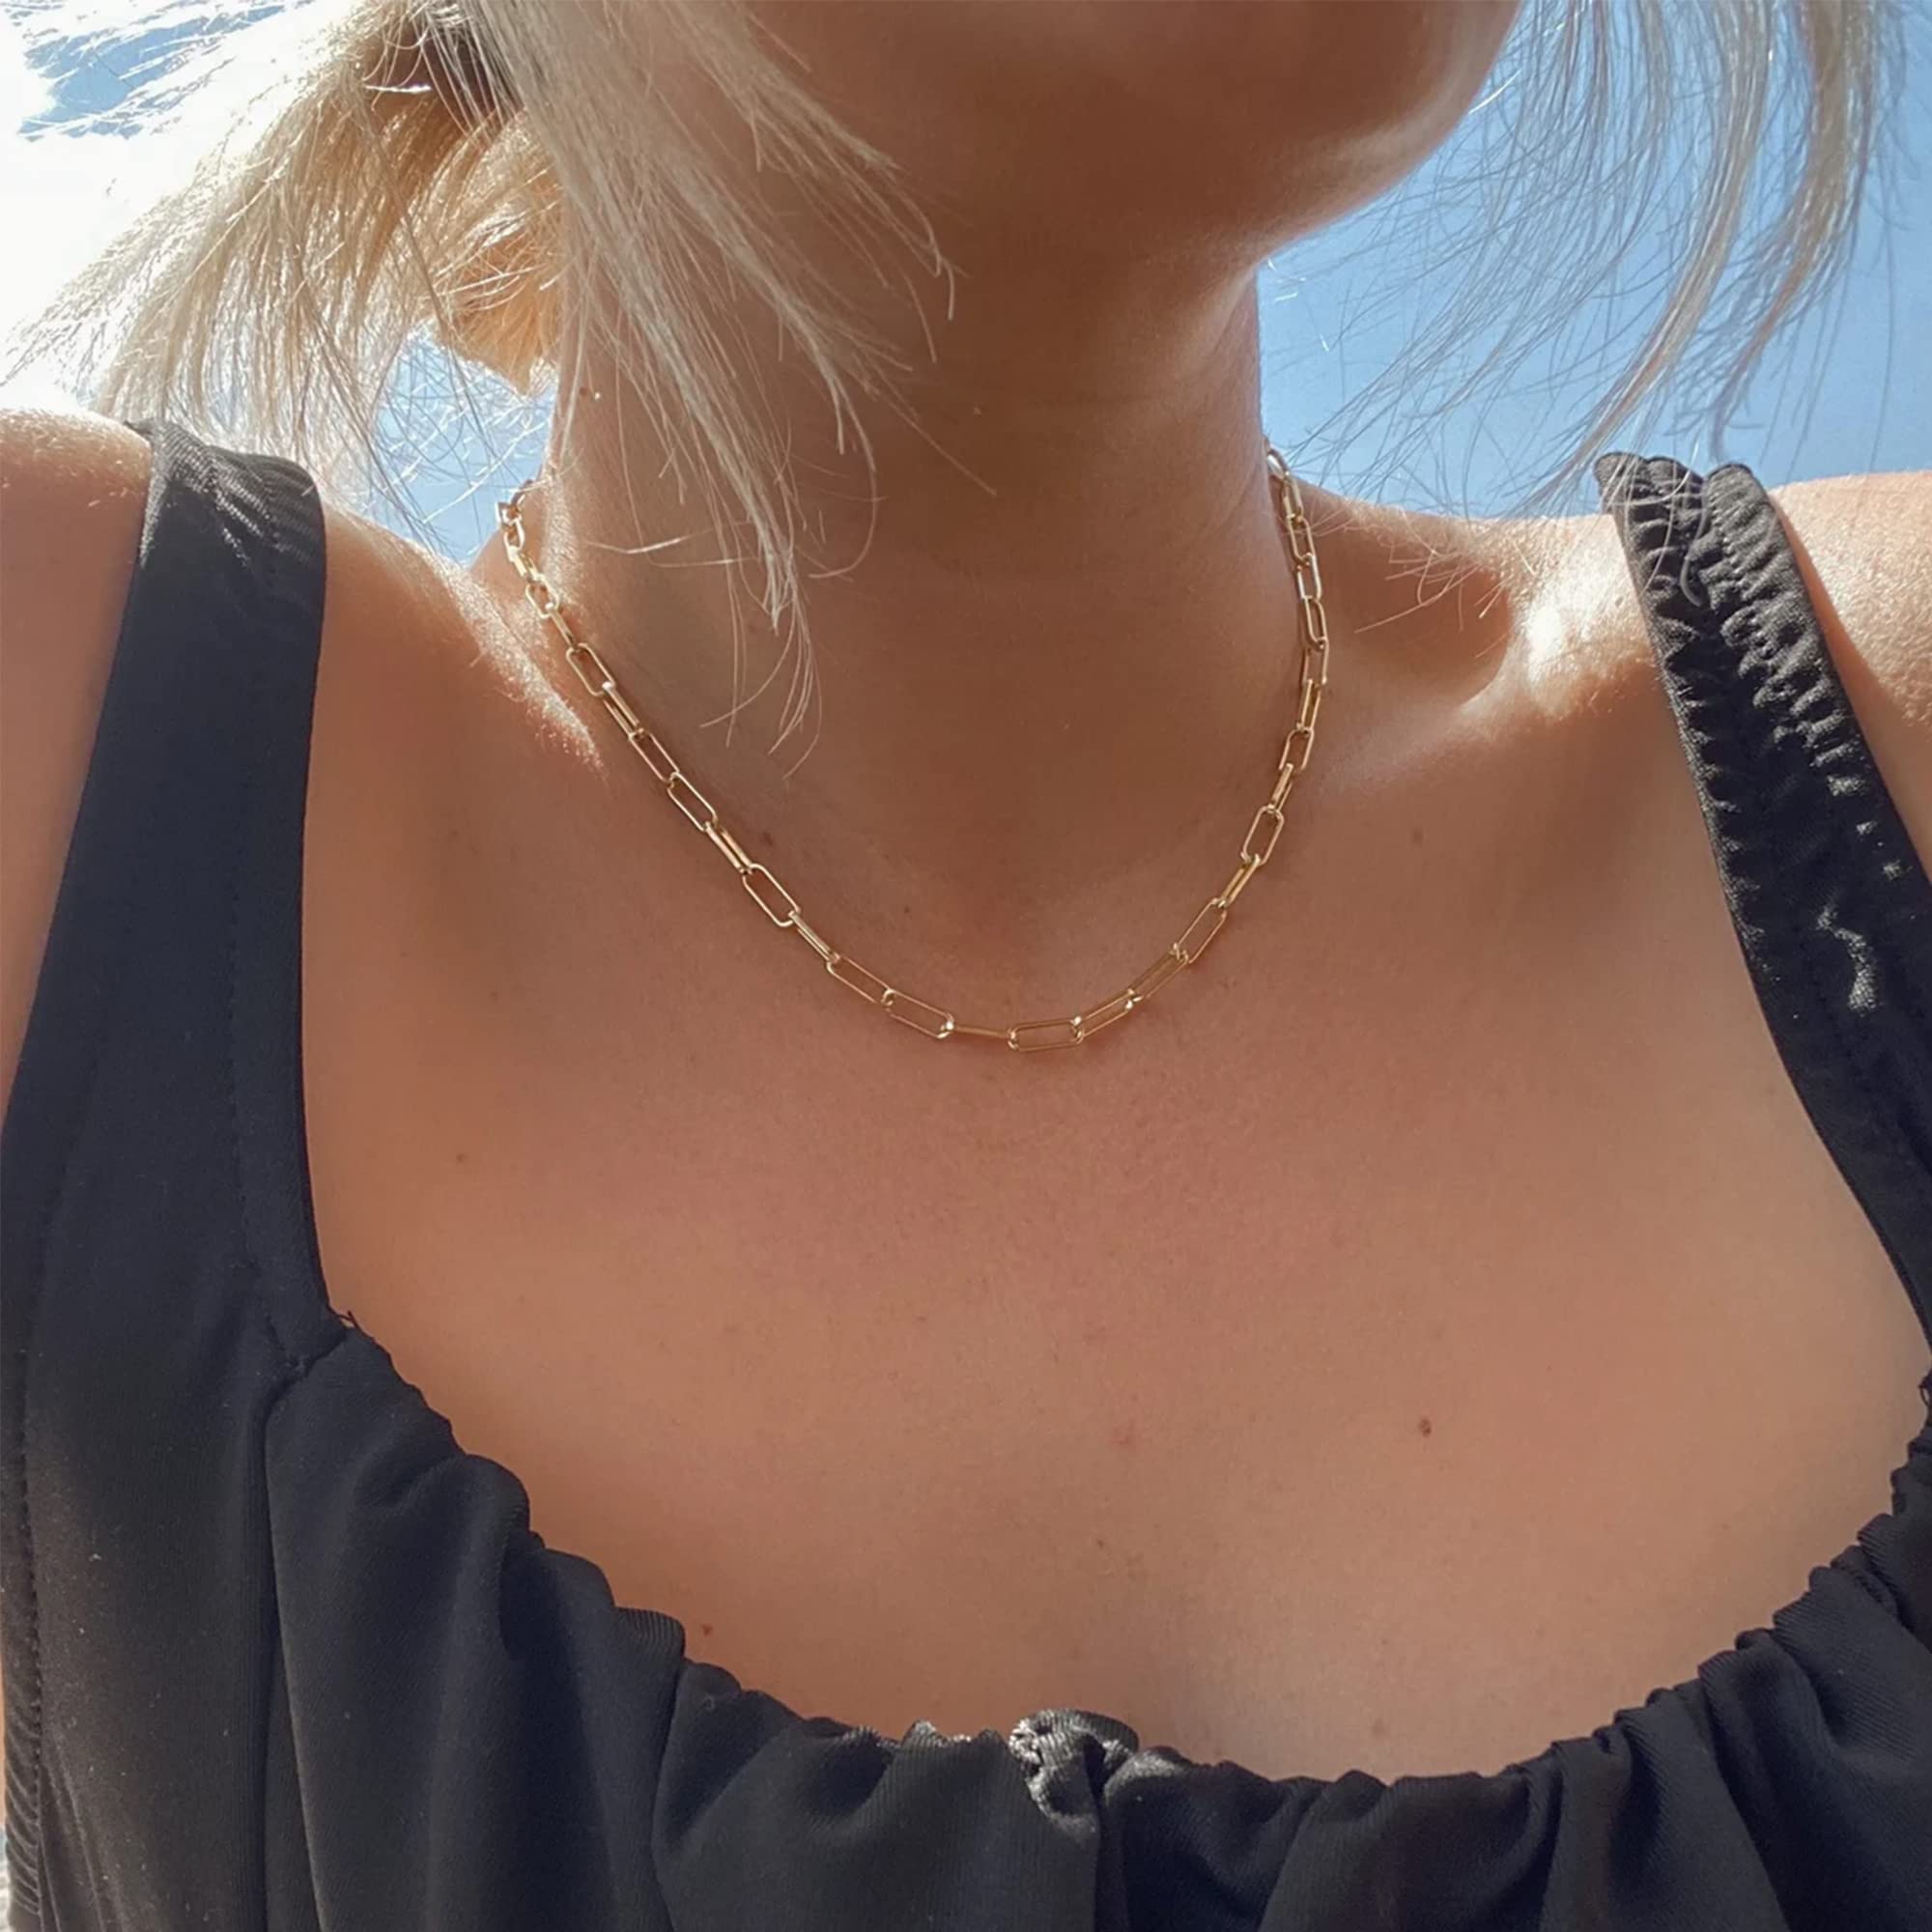 GOLD CURB NECKLACE | Chunky gold necklaces, Chain necklace outfit, Gold  chain choker